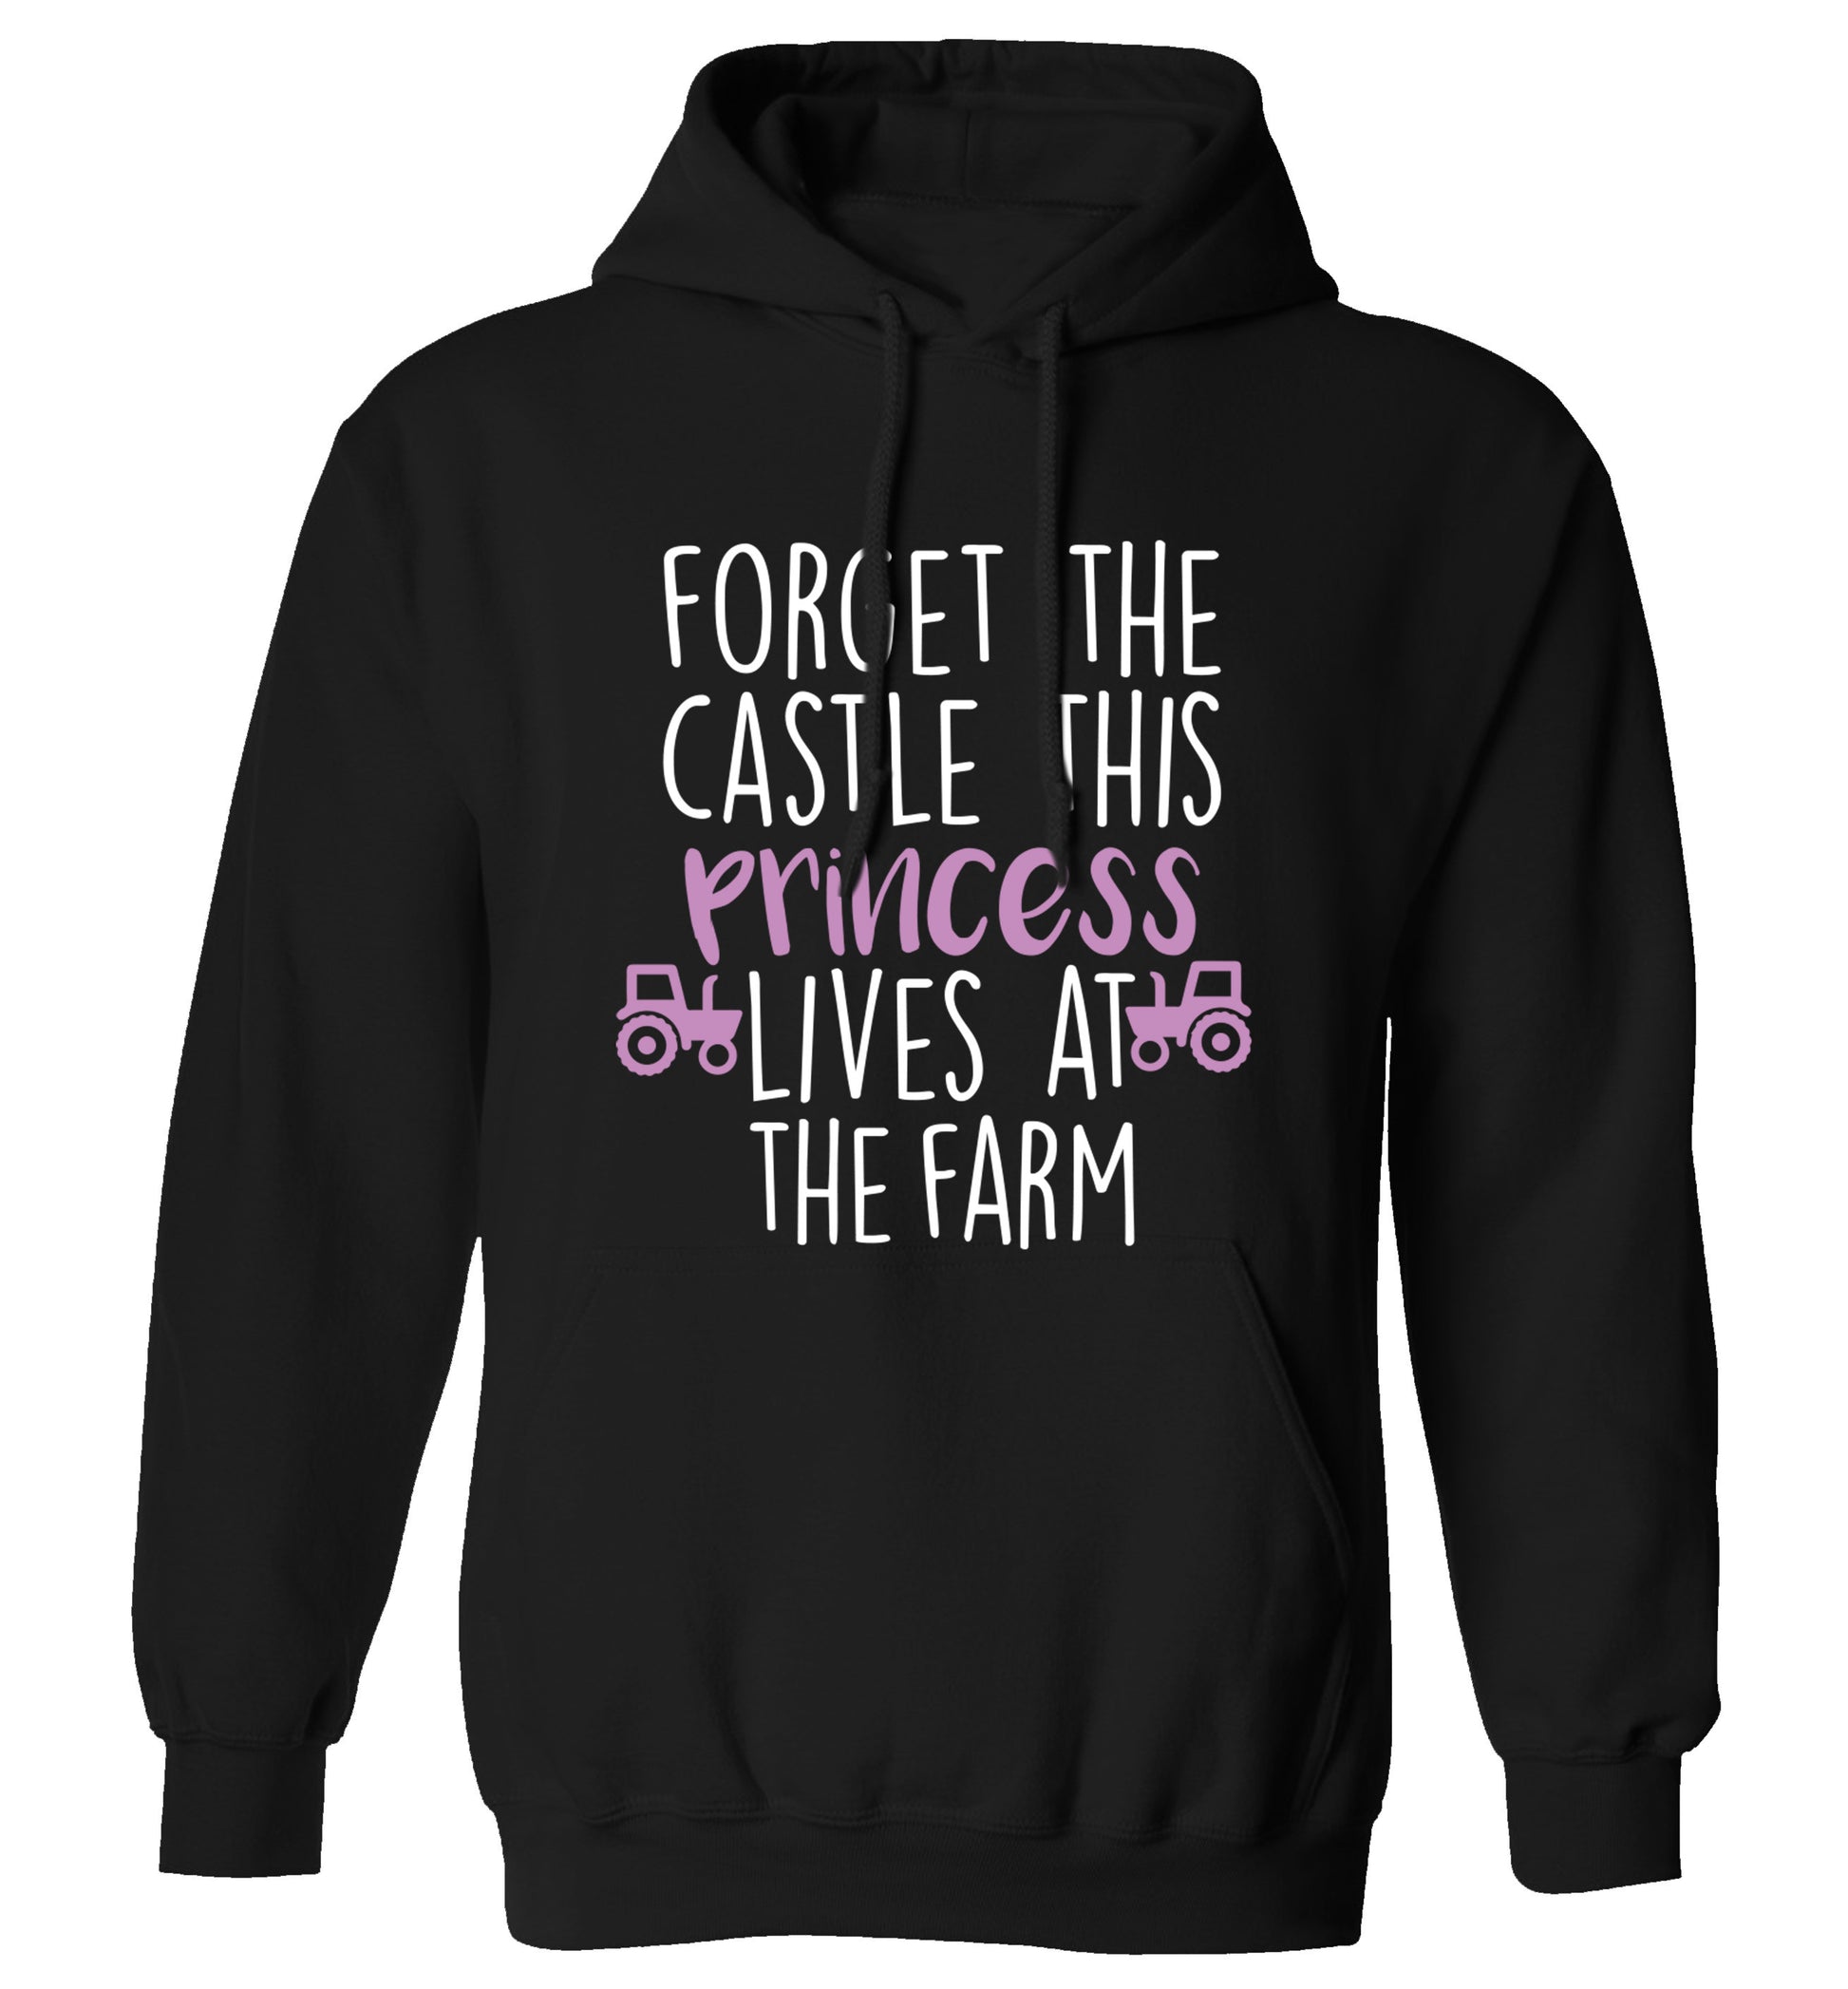 Forget the castle this princess lives at the farm adults unisex black hoodie 2XL